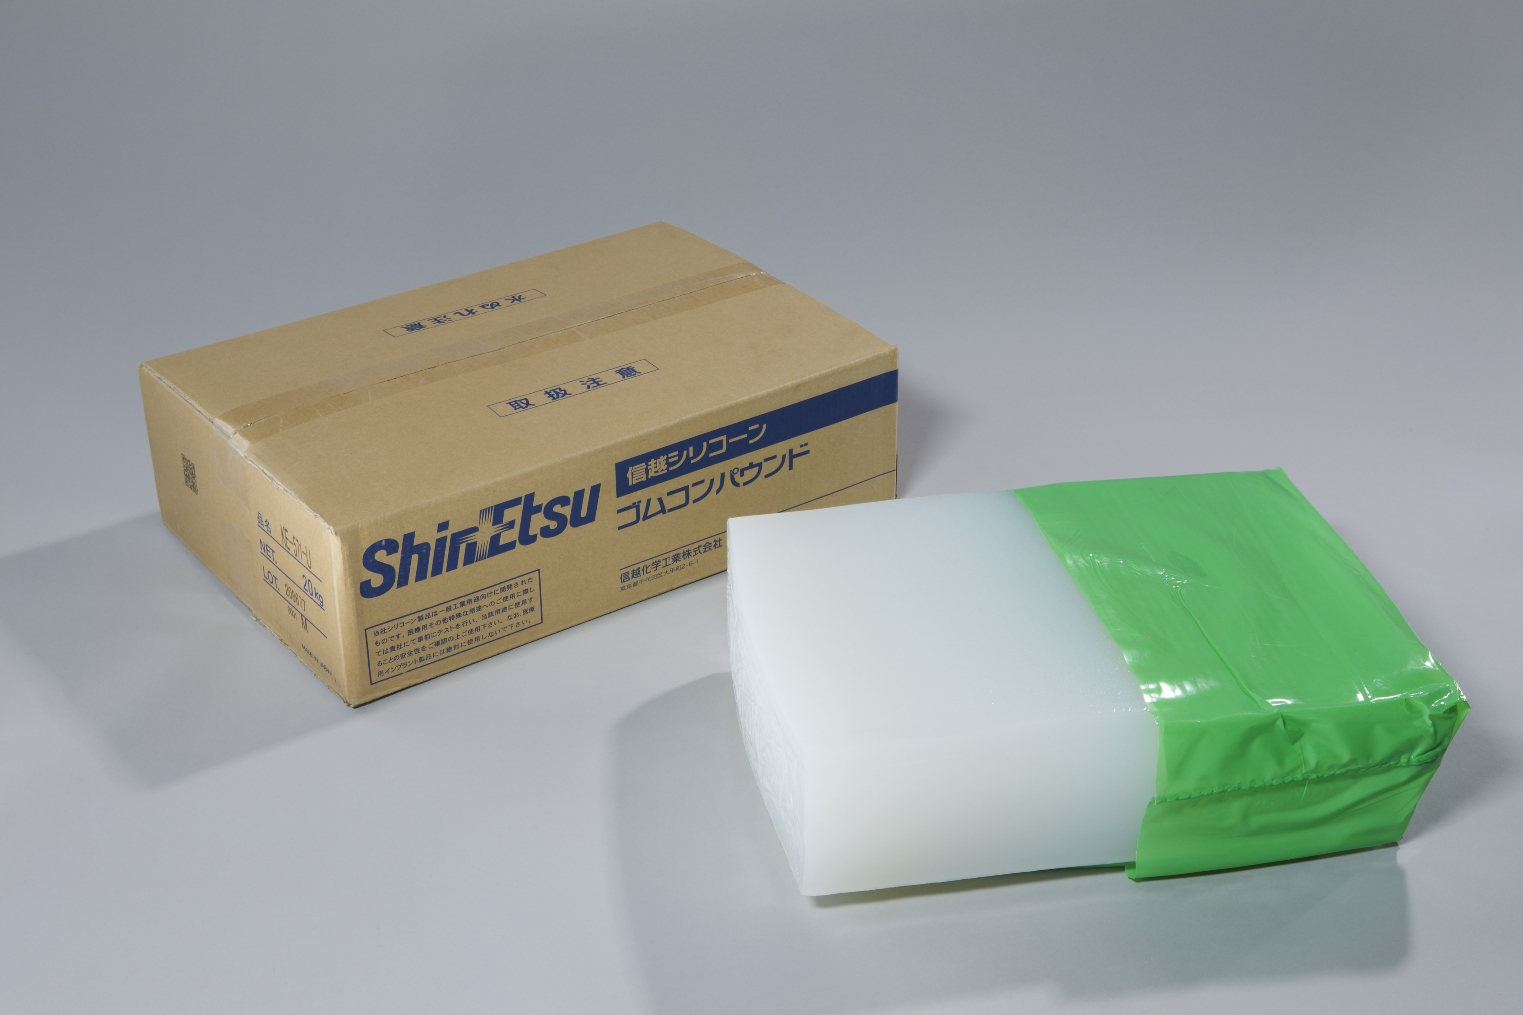 Shin-Etsu Silicone : What is silicone? : What is silicone made of?